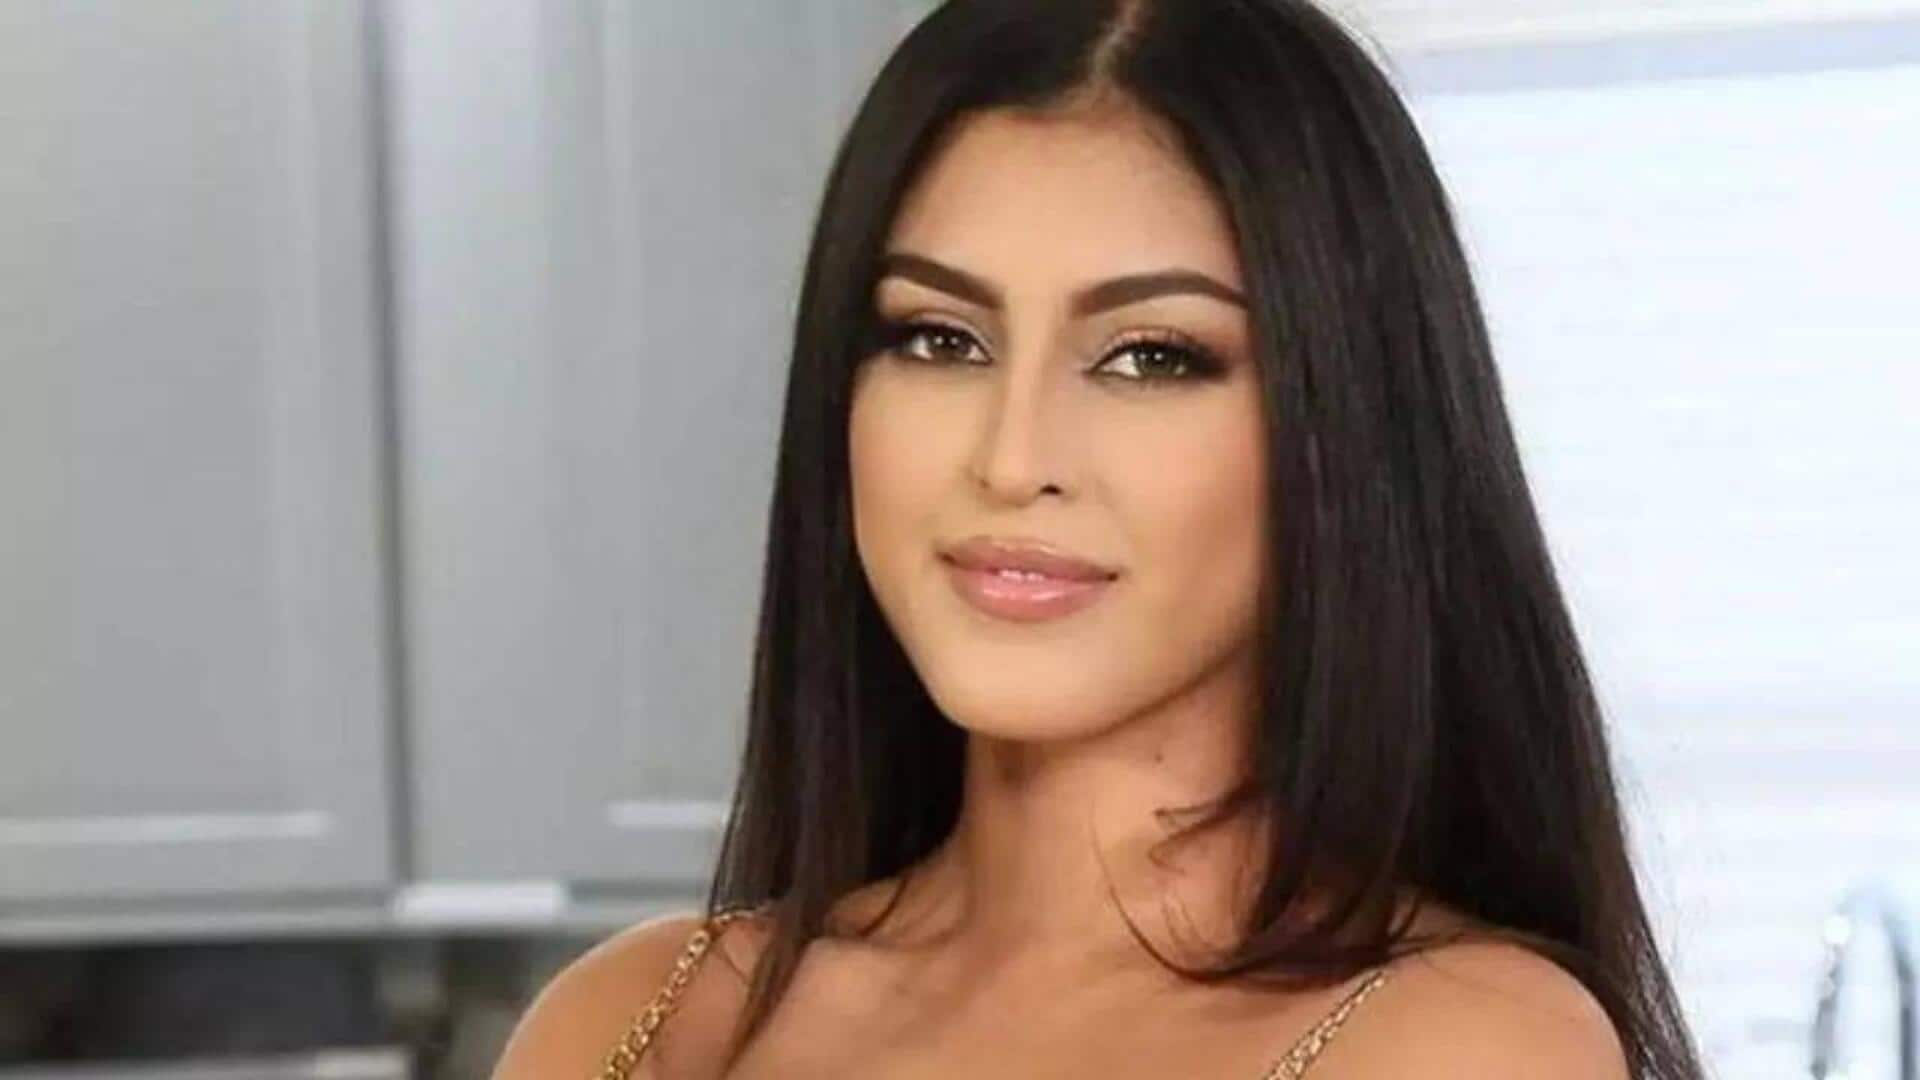 Adult actor Sophia Leone (26) dies; third such mysterious death